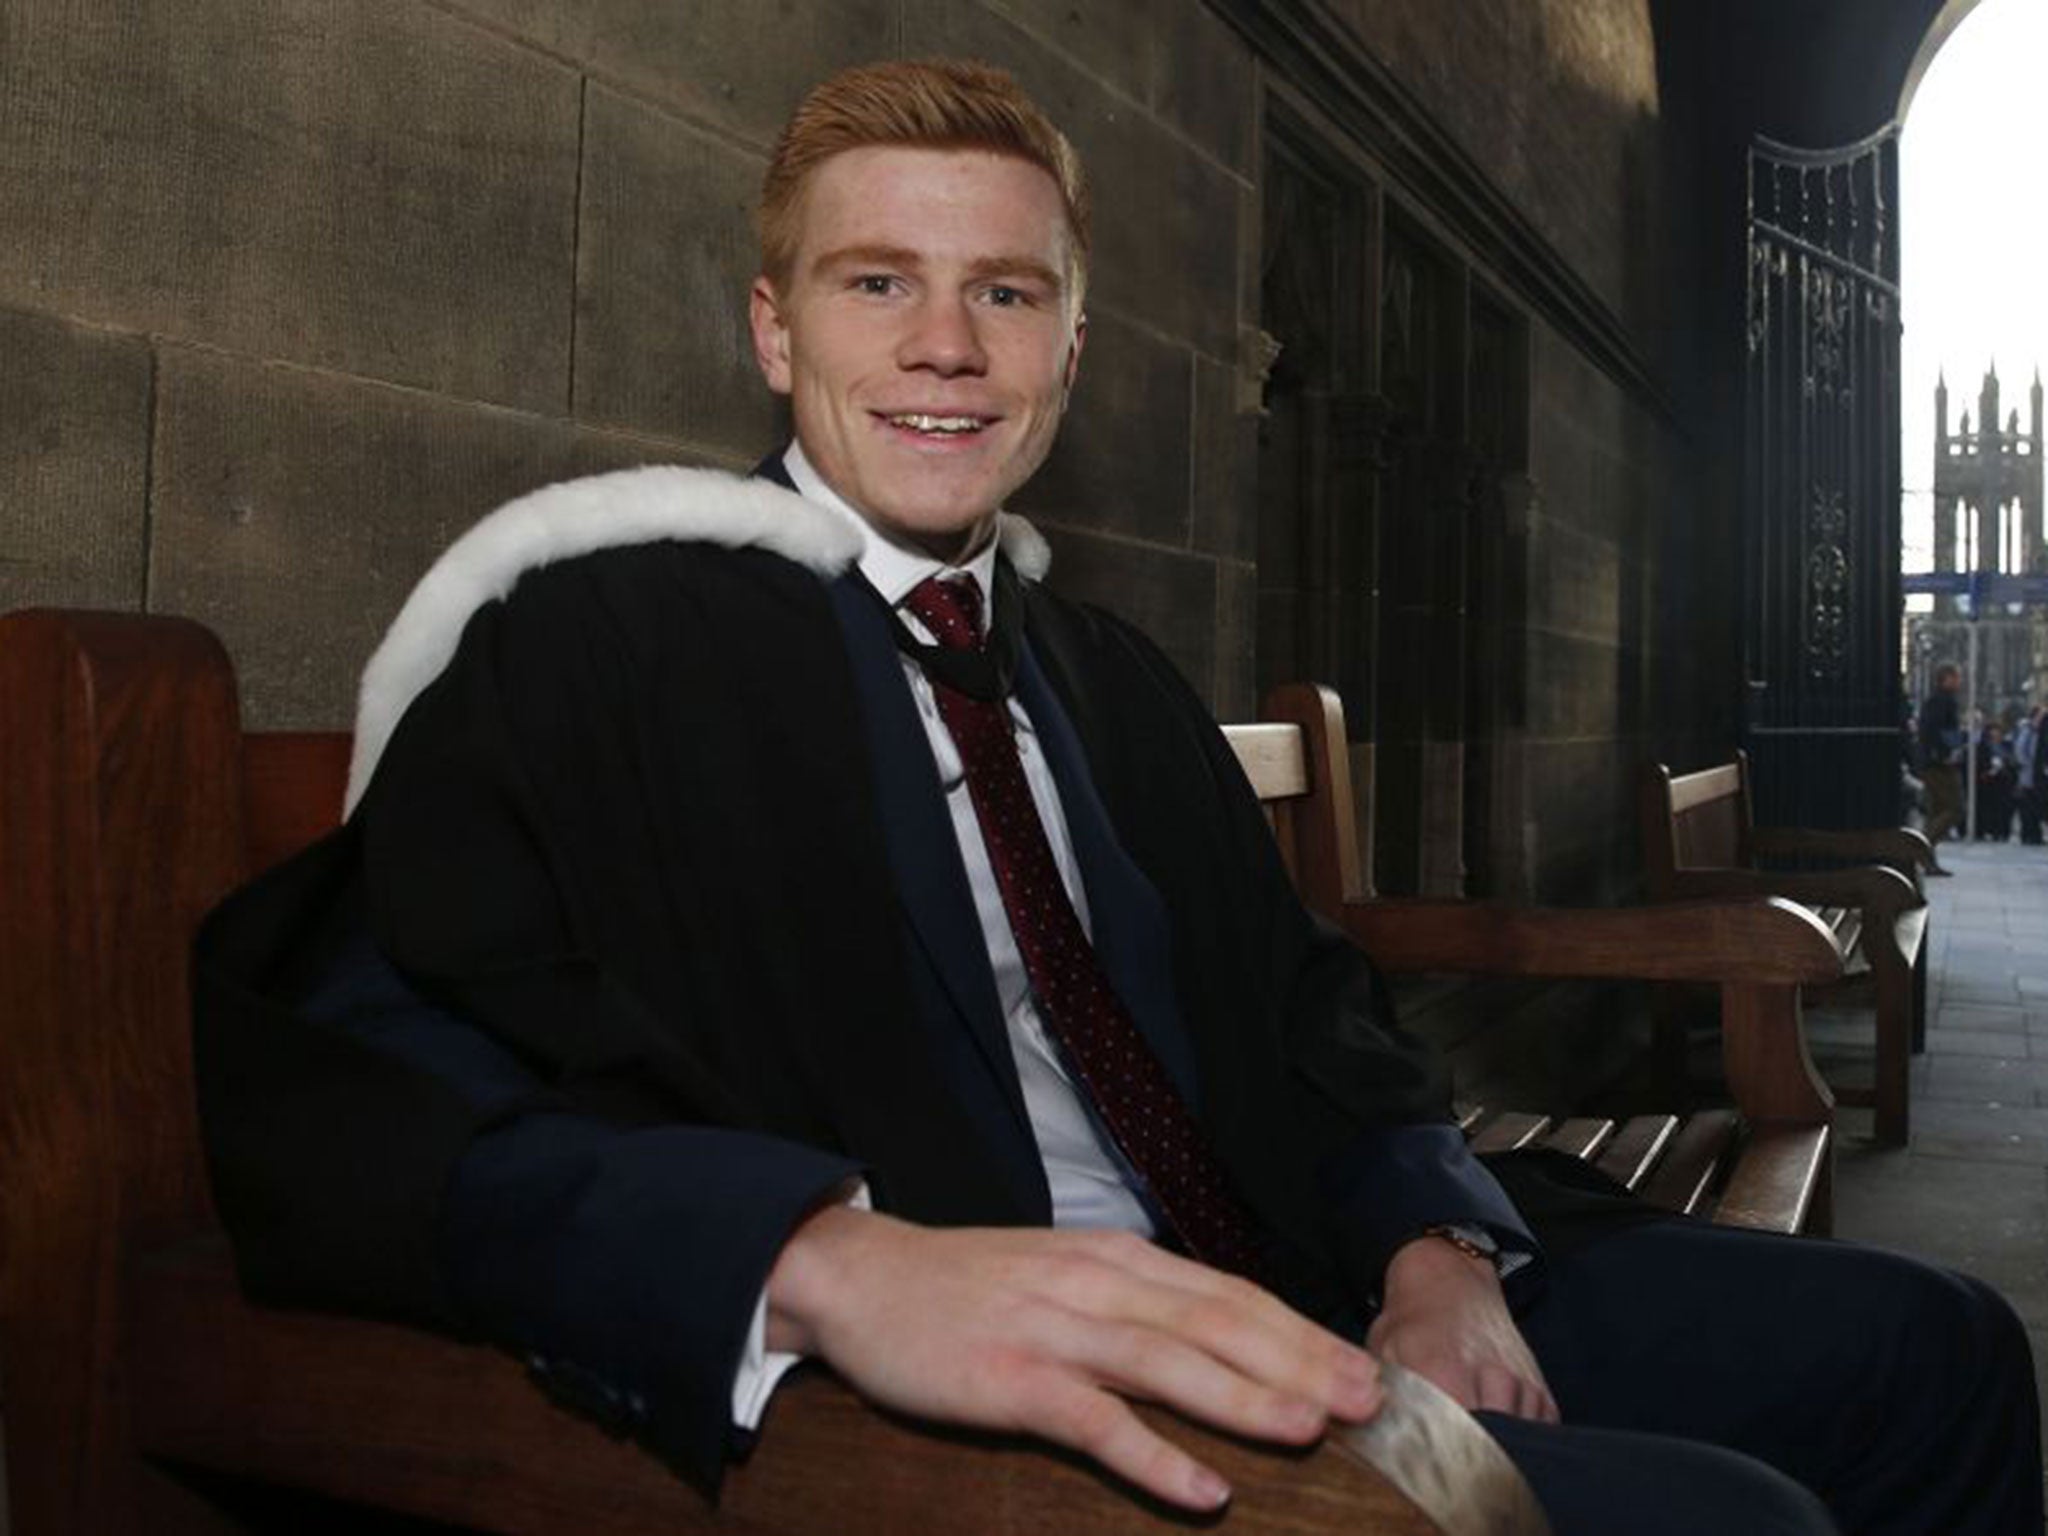 Duncan Watmore graduated with First Class Honours from Newcastle University with a degree in Economics and Business Management